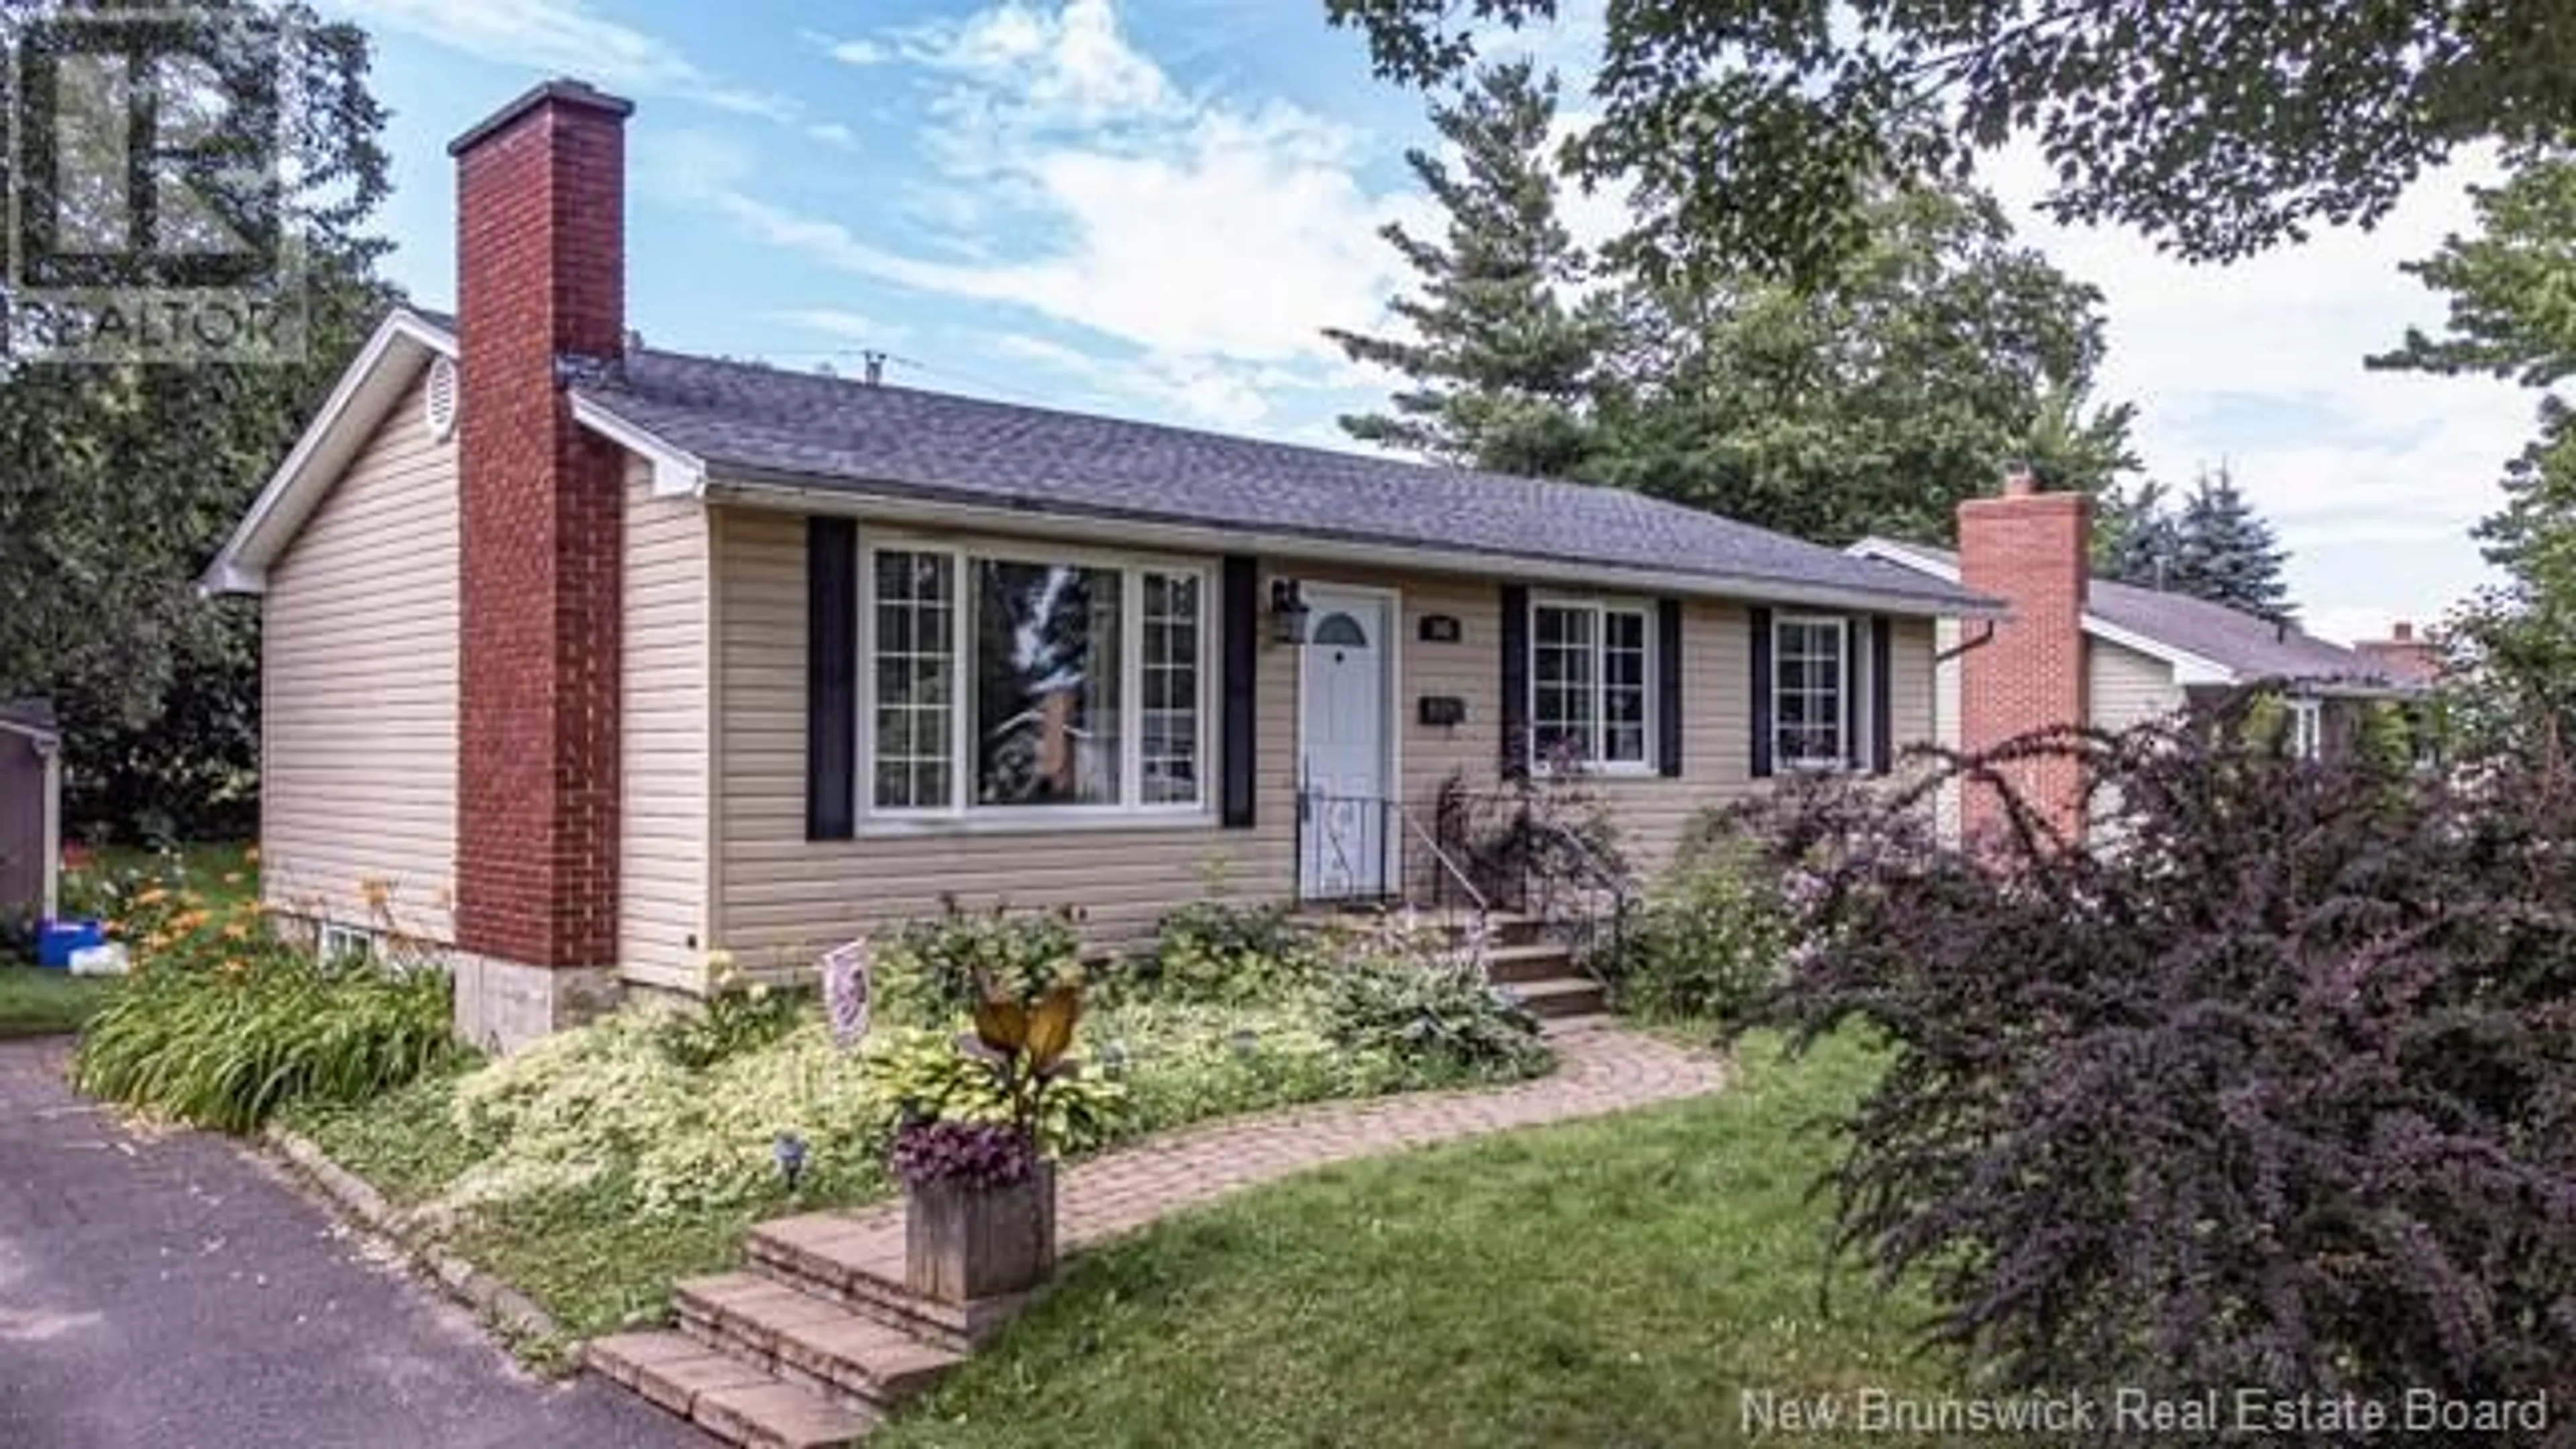 Home with brick exterior material for 365 Wetmore Road, Fredericton New Brunswick E3B5L4